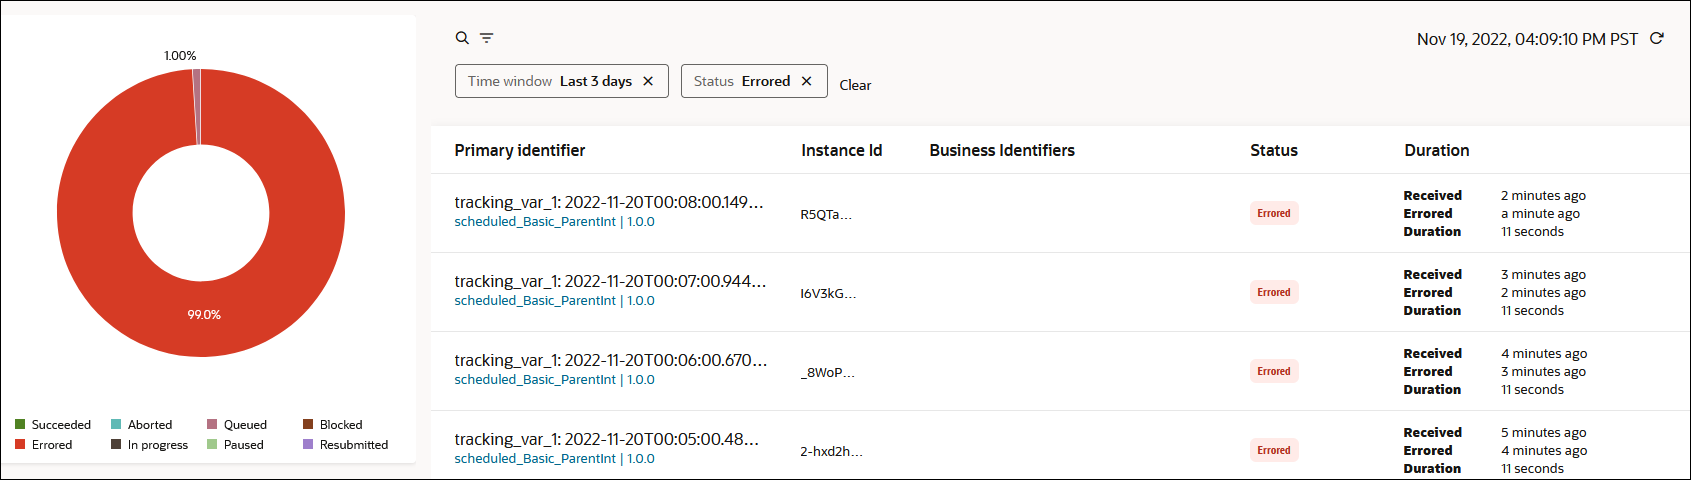 At the top are search and filter icons. At the far right is the timestamp and refresh button. Below all these buttons and icons is a table with columns for Primary Identifier, instance Id, Business Identifiers, Status, and Duration. The table is populated with instance details. At the far left is a graph that shows the state of instances: Successful, Aborted, Queued, Blocked, Errored, In progress, Paused, and Resubmitted.